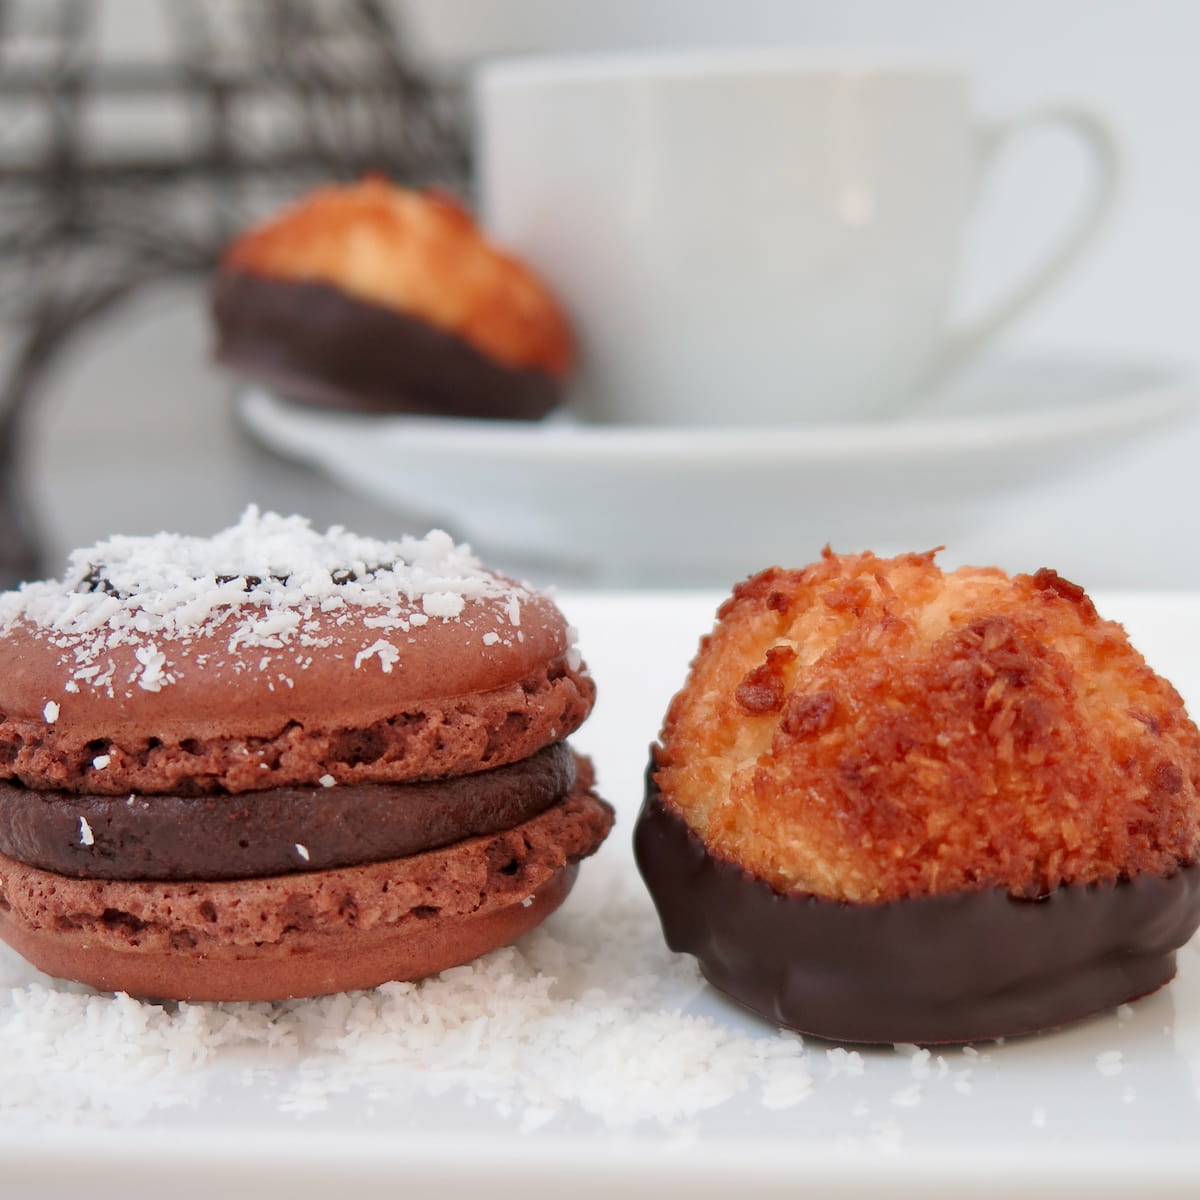 chocolate macaron and a coconut macaroon side by side